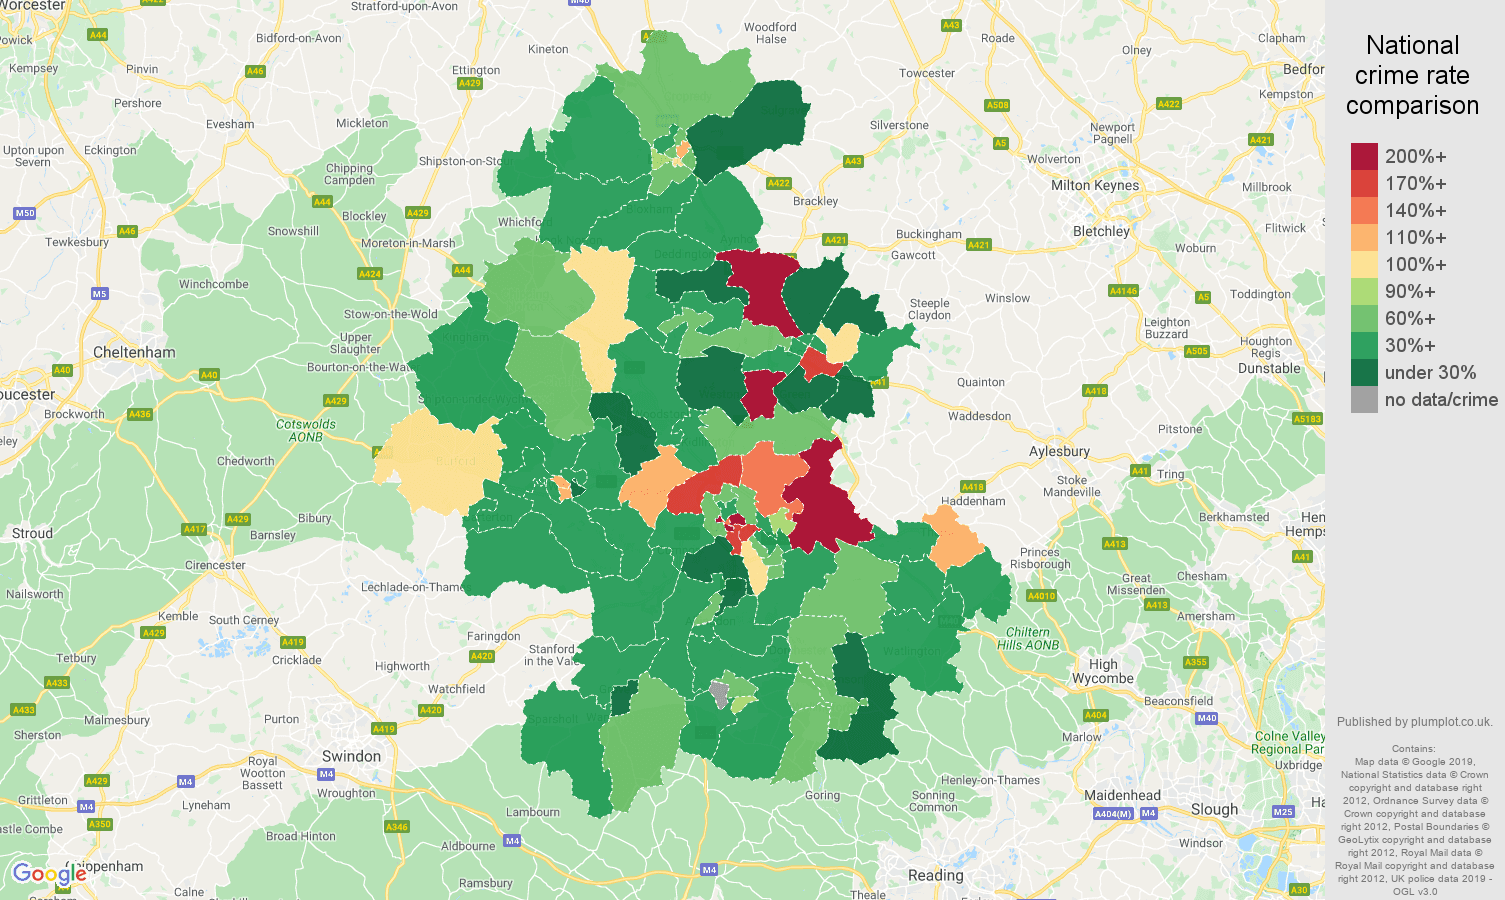 Oxford other theft crime rate comparison map